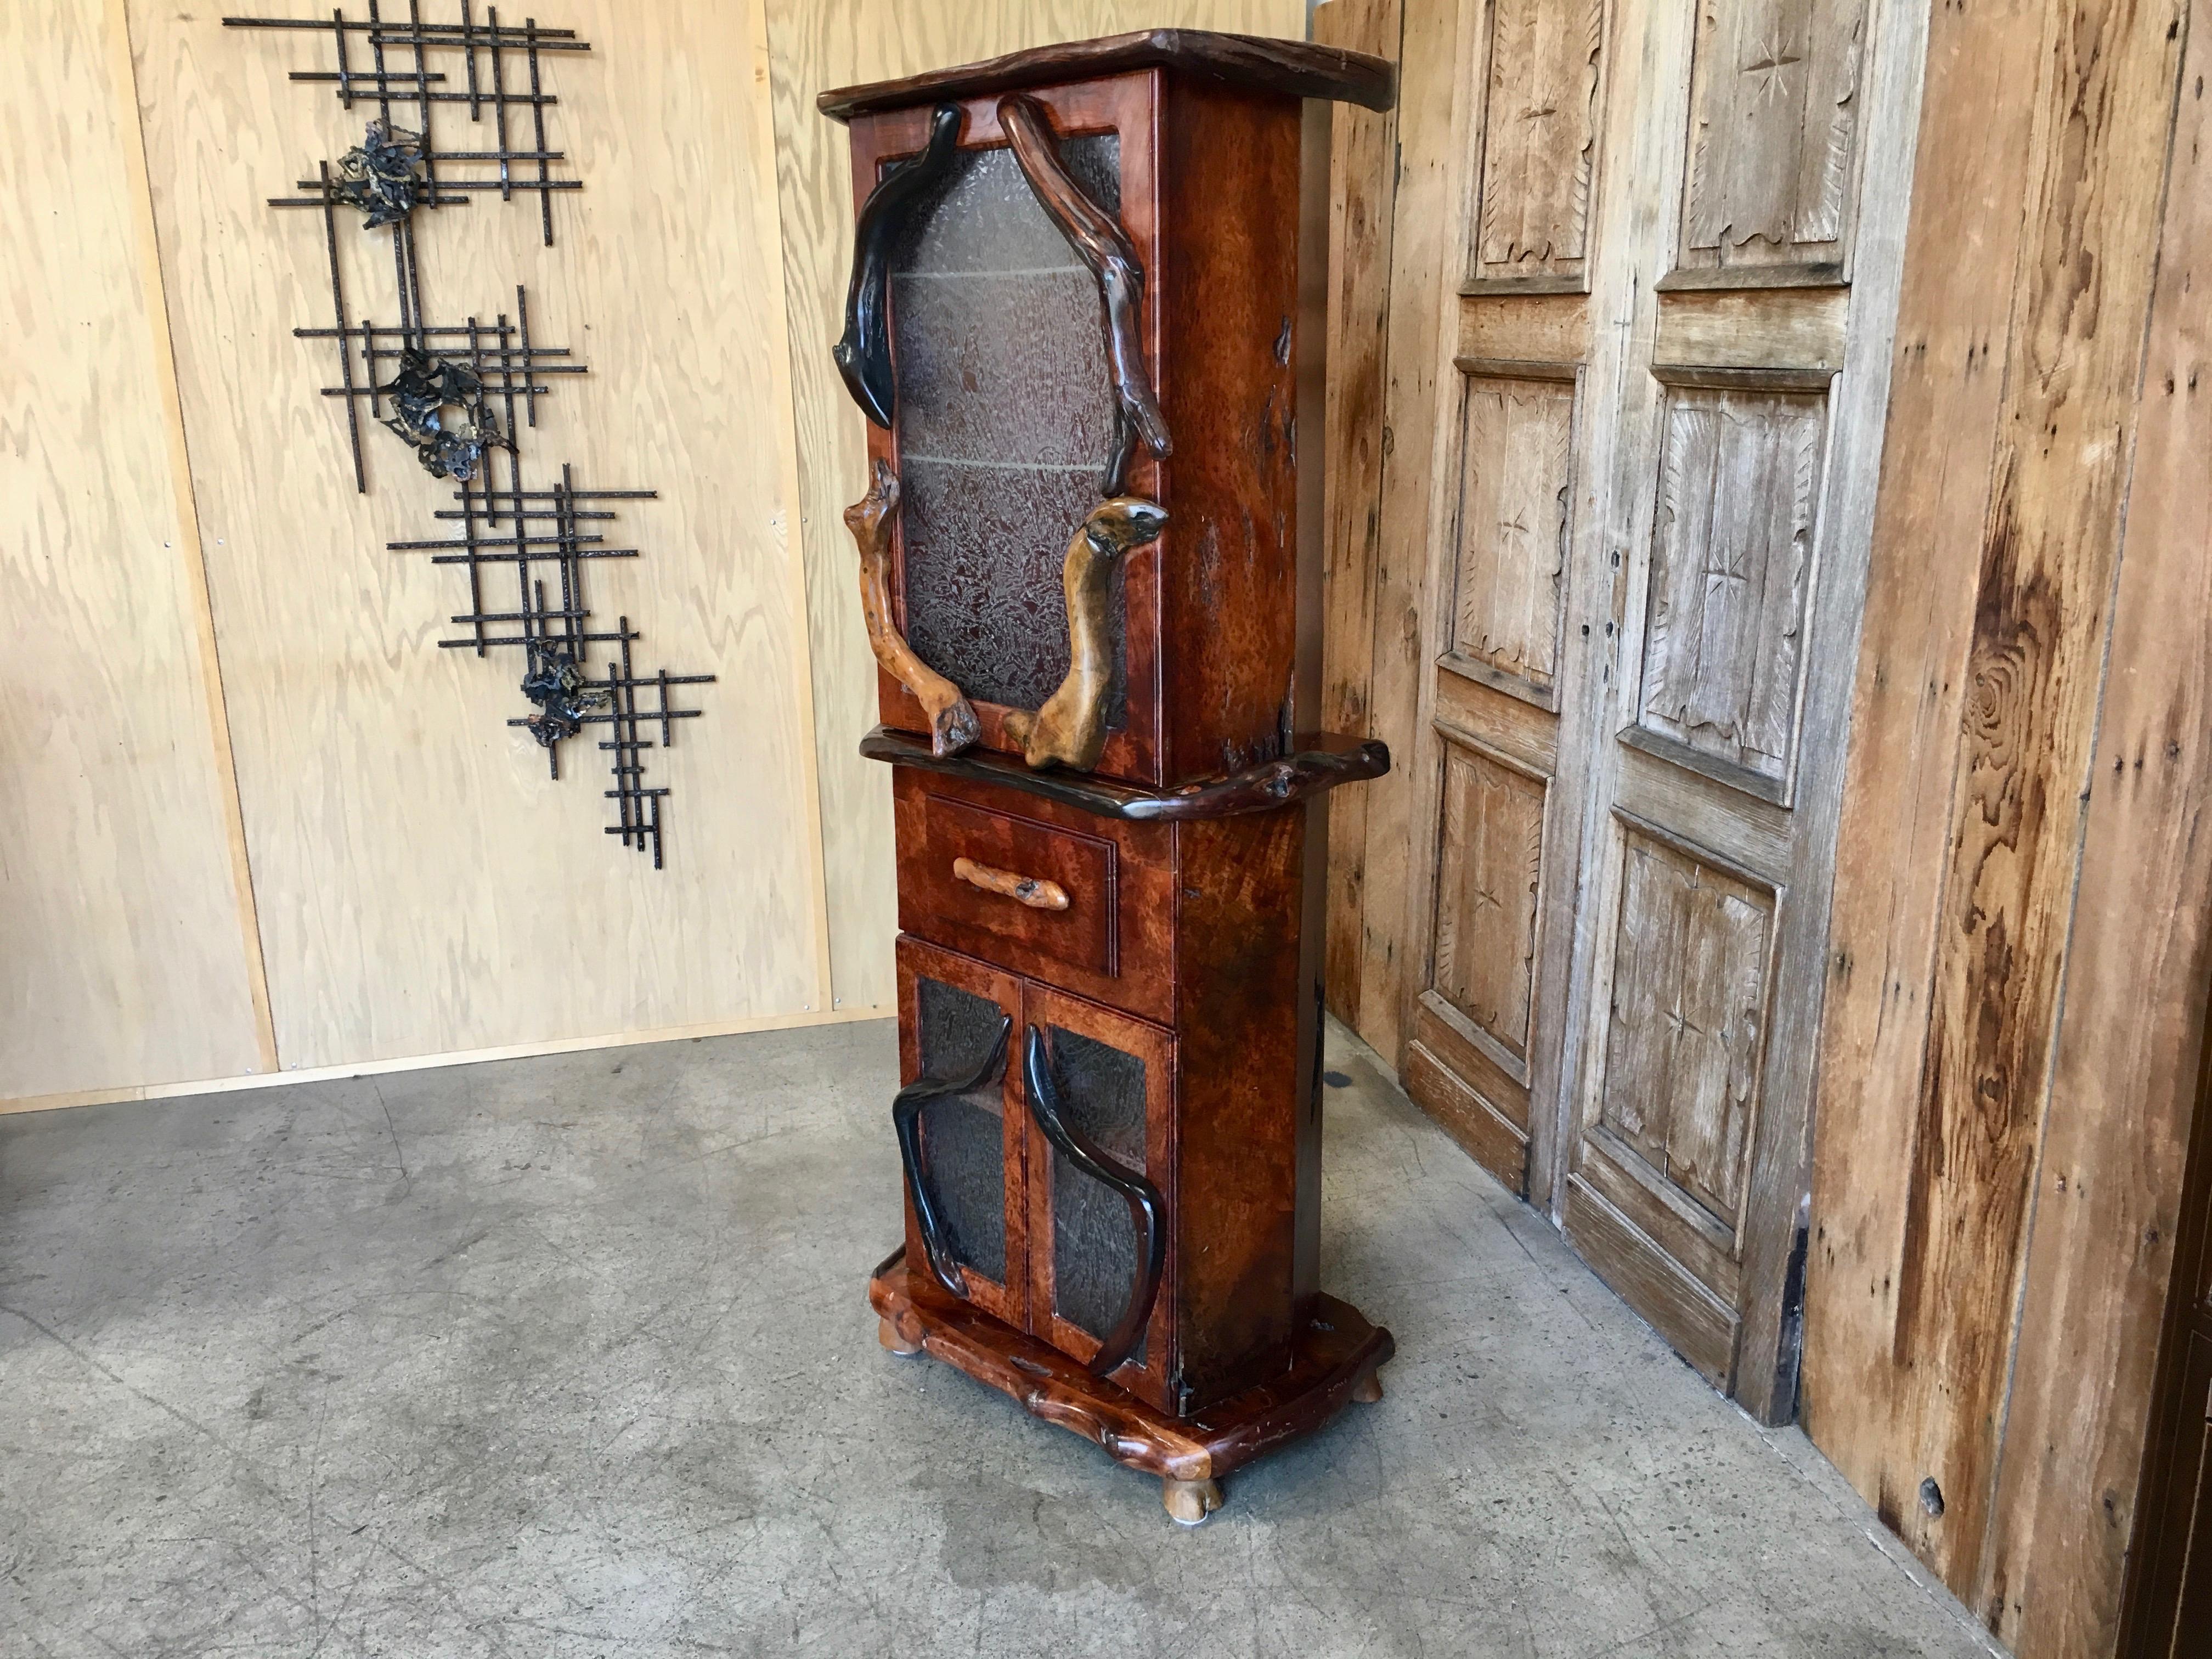 Massive redwood planks make this cabinet very impressive with original (glue chip glass) that has a nice organic design and twisted branch handles.